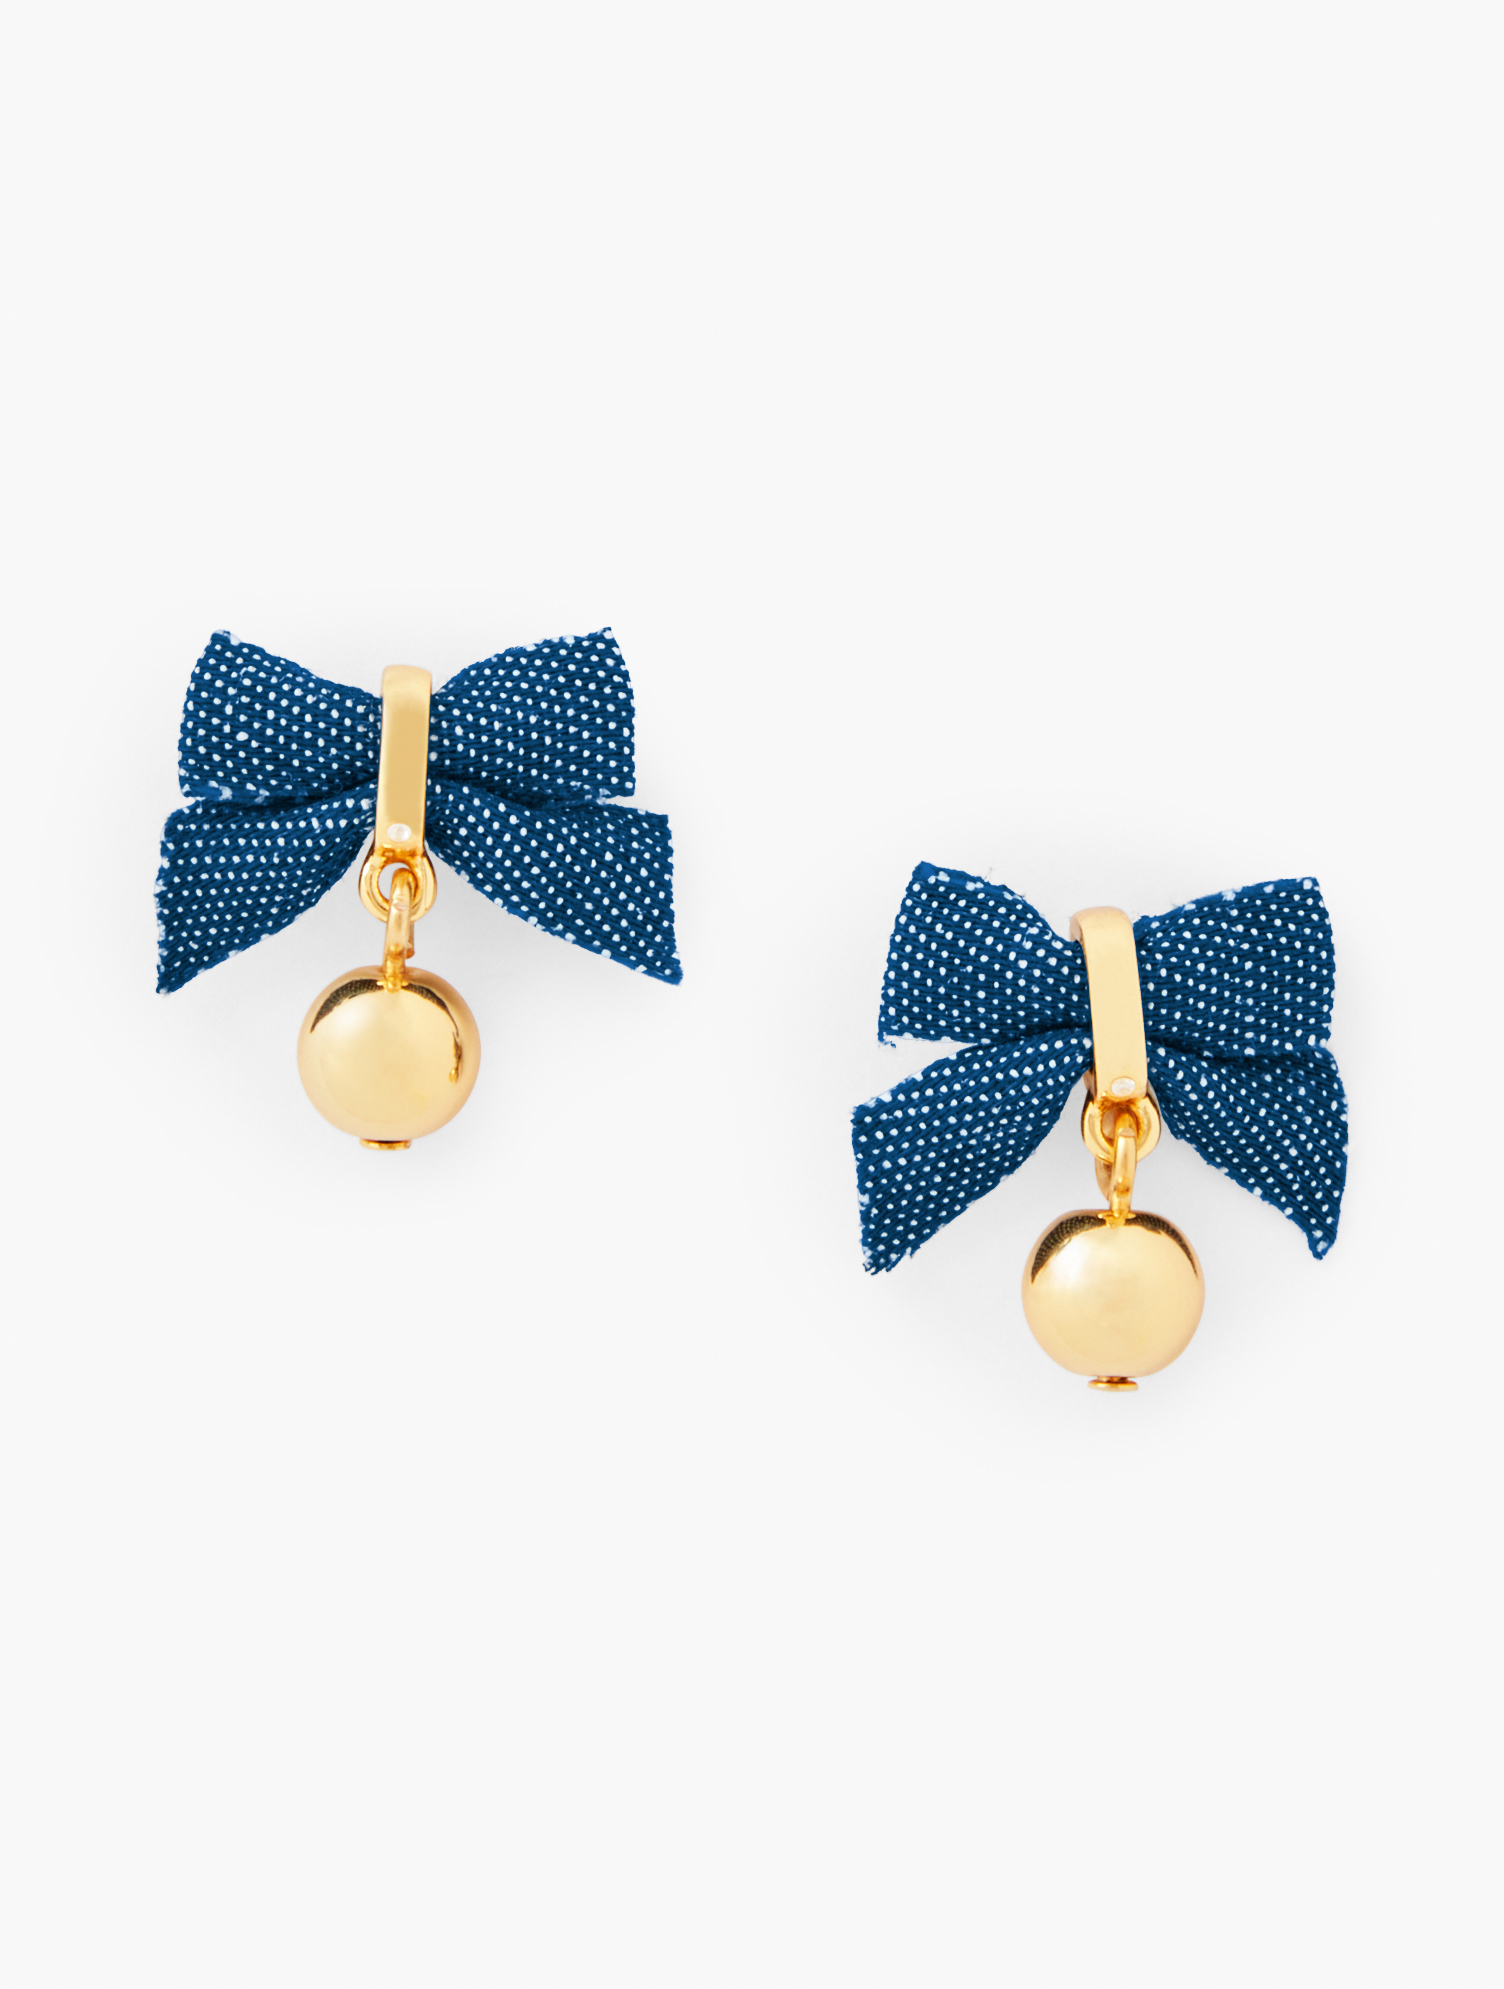 Talbots Chambray Bow Earrings - Lakeshore Blue/gold - 001  In Lakeshore Blue,gold